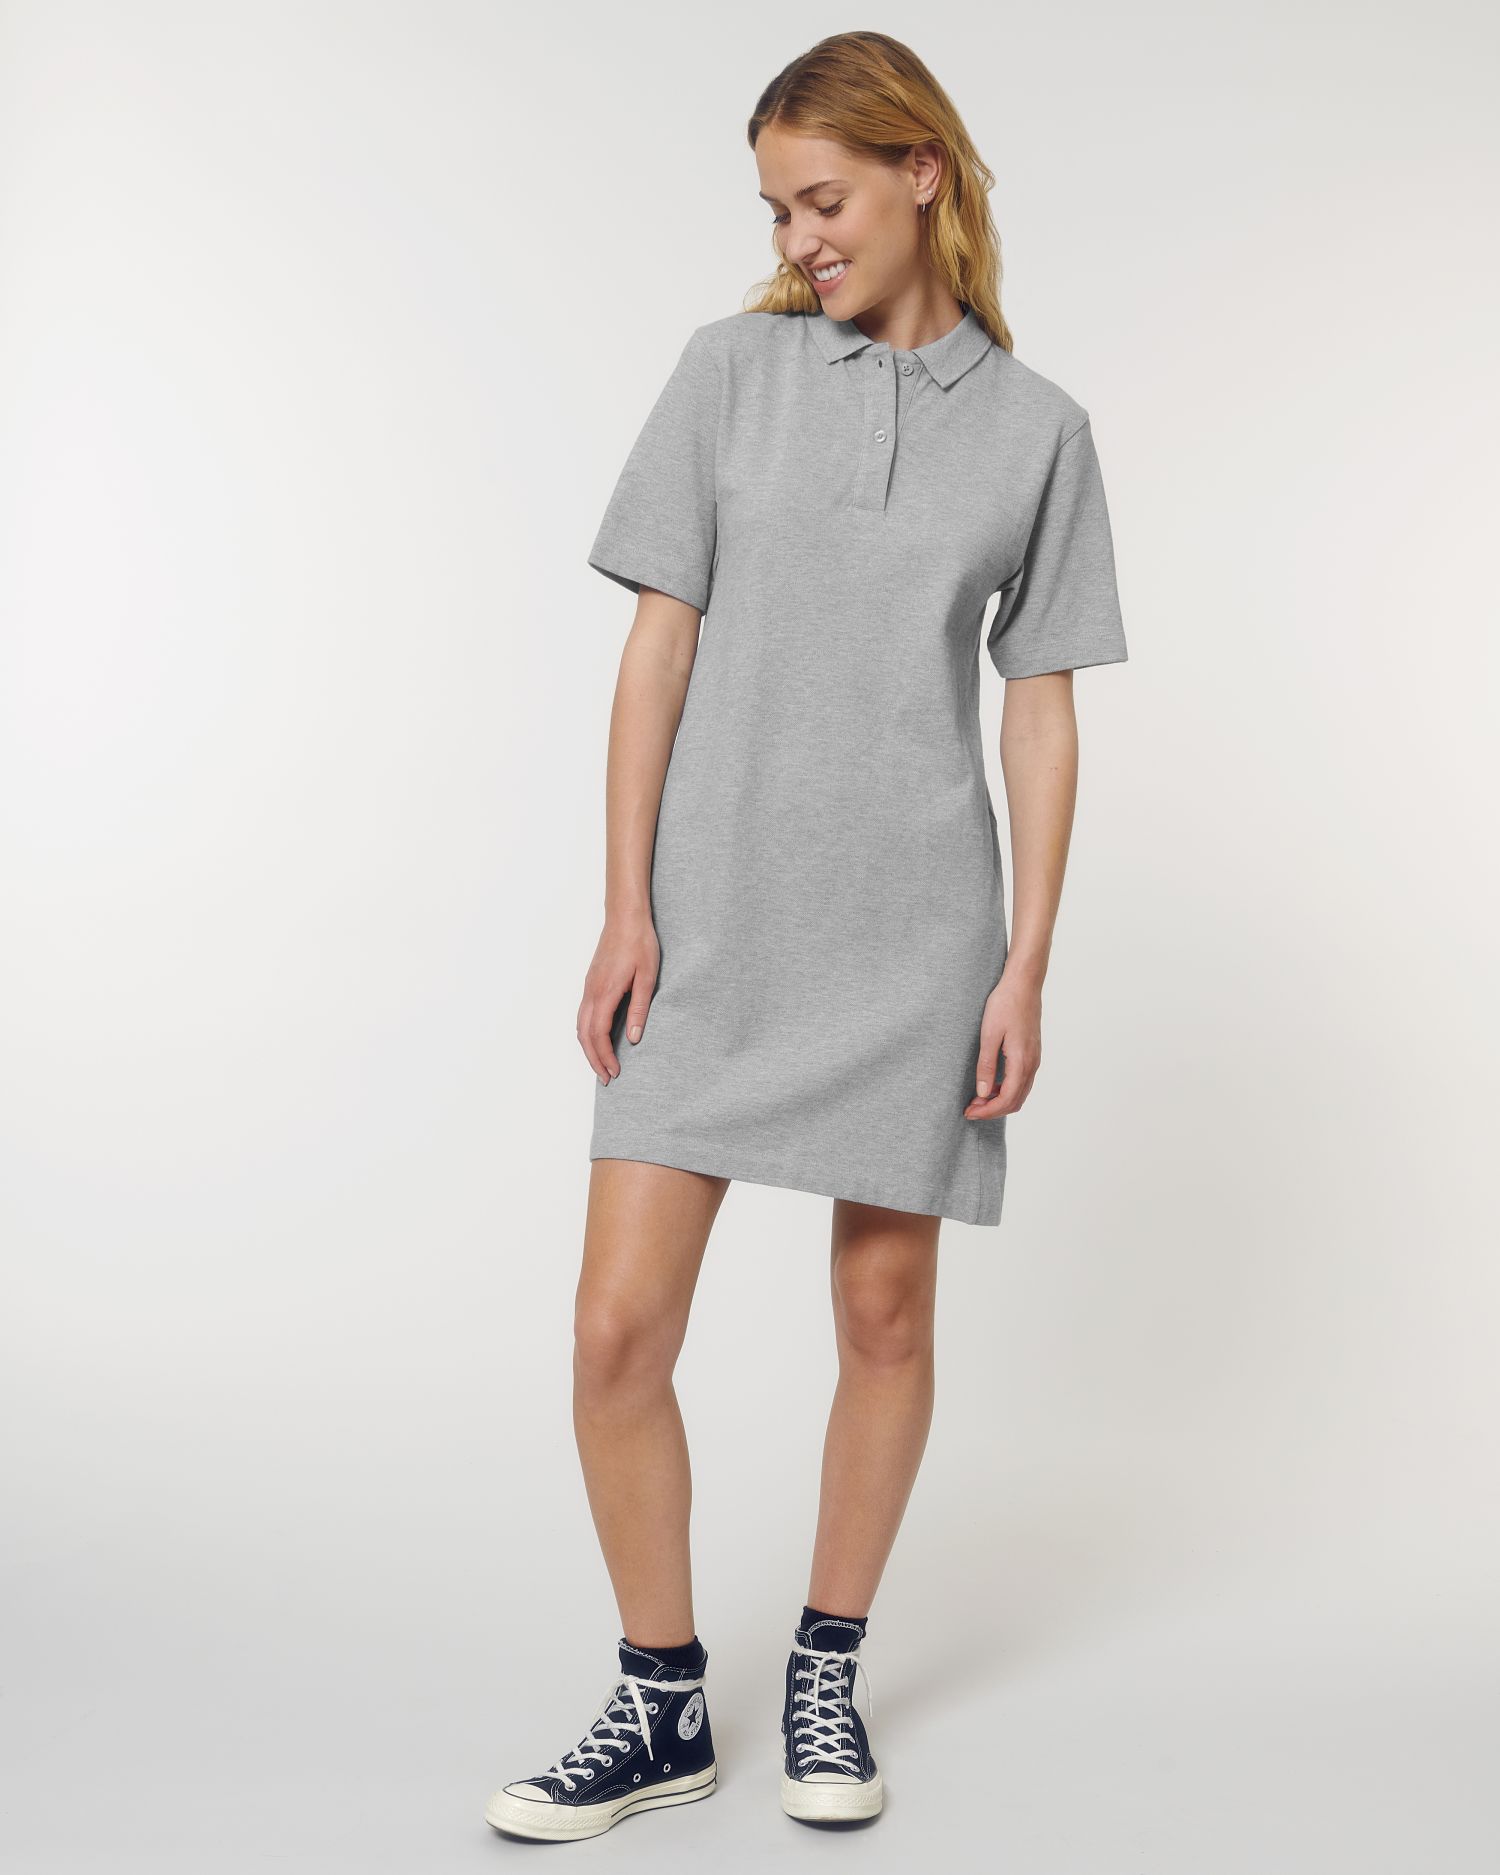 Personalise Stella Paiger The women's polo dress by Stanley/Stella at ...